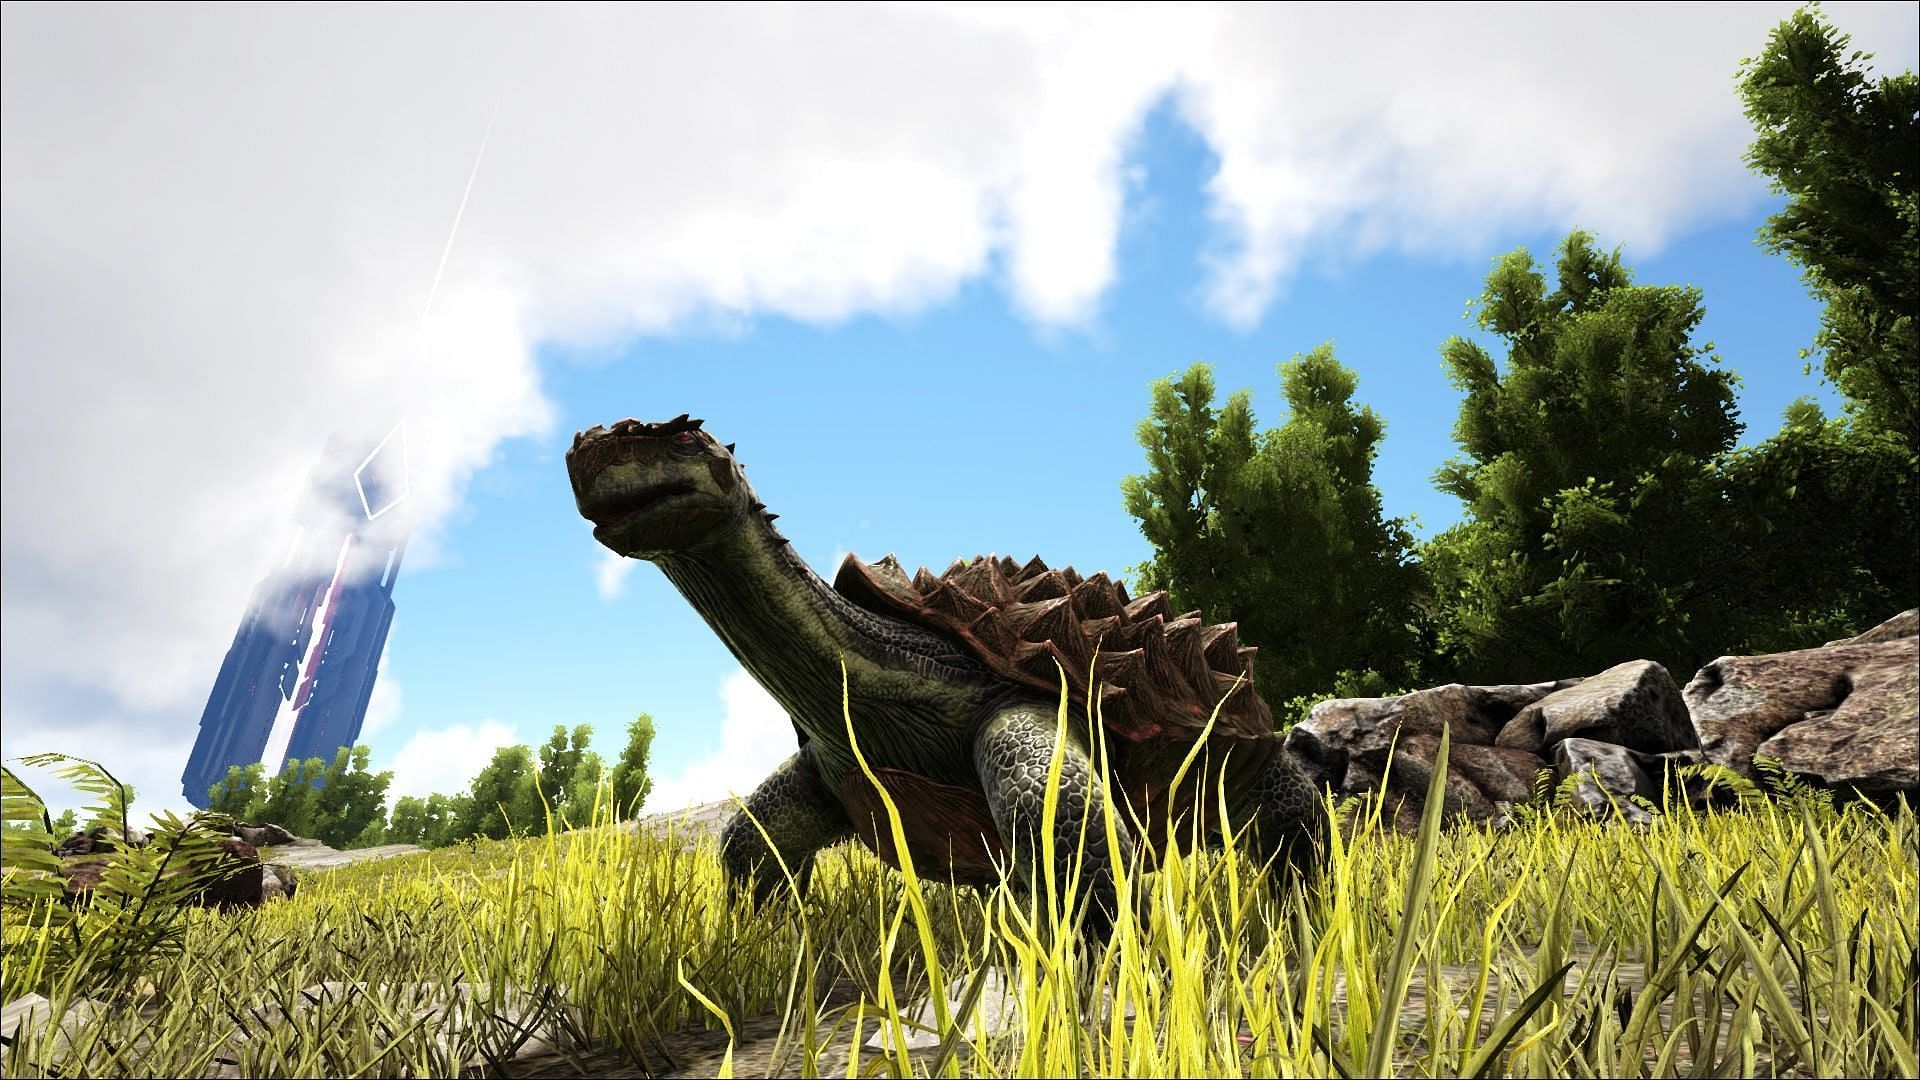 A Carbonemys on a field in Ark